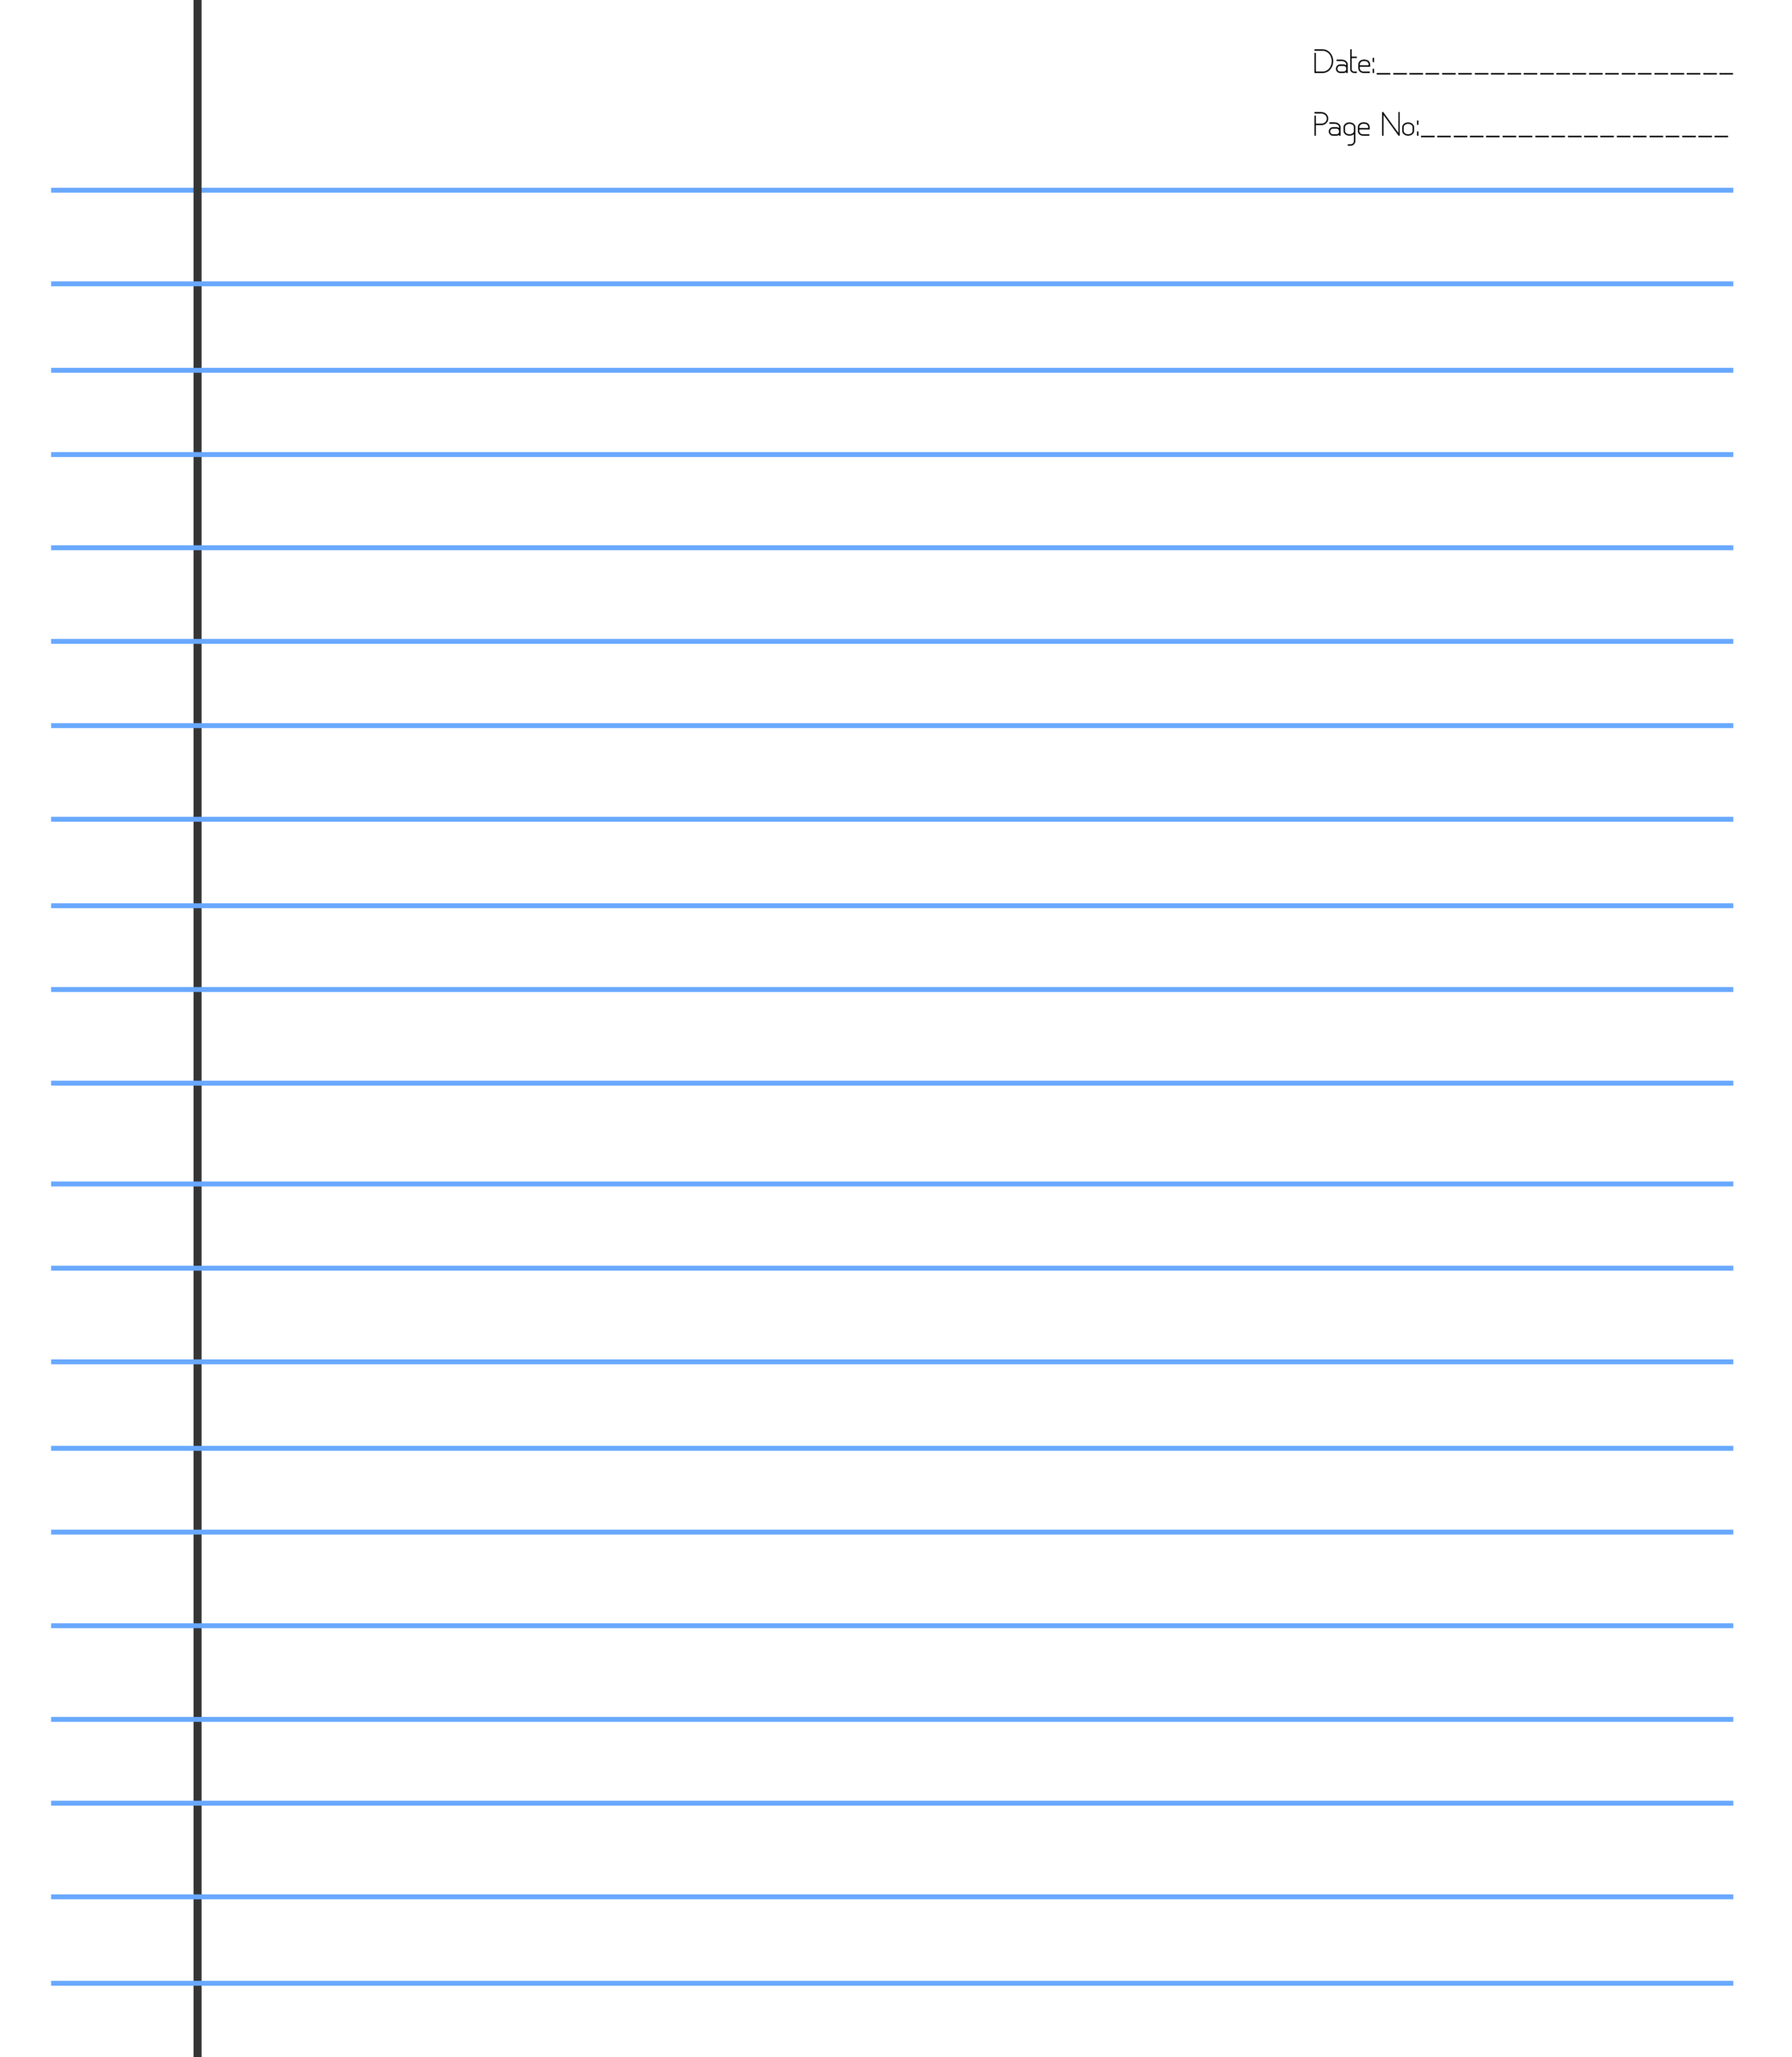 ❤️20+ Free Printable Blank Lined Paper Template In Pdf❤️ For Microsoft Word Lined Paper Template